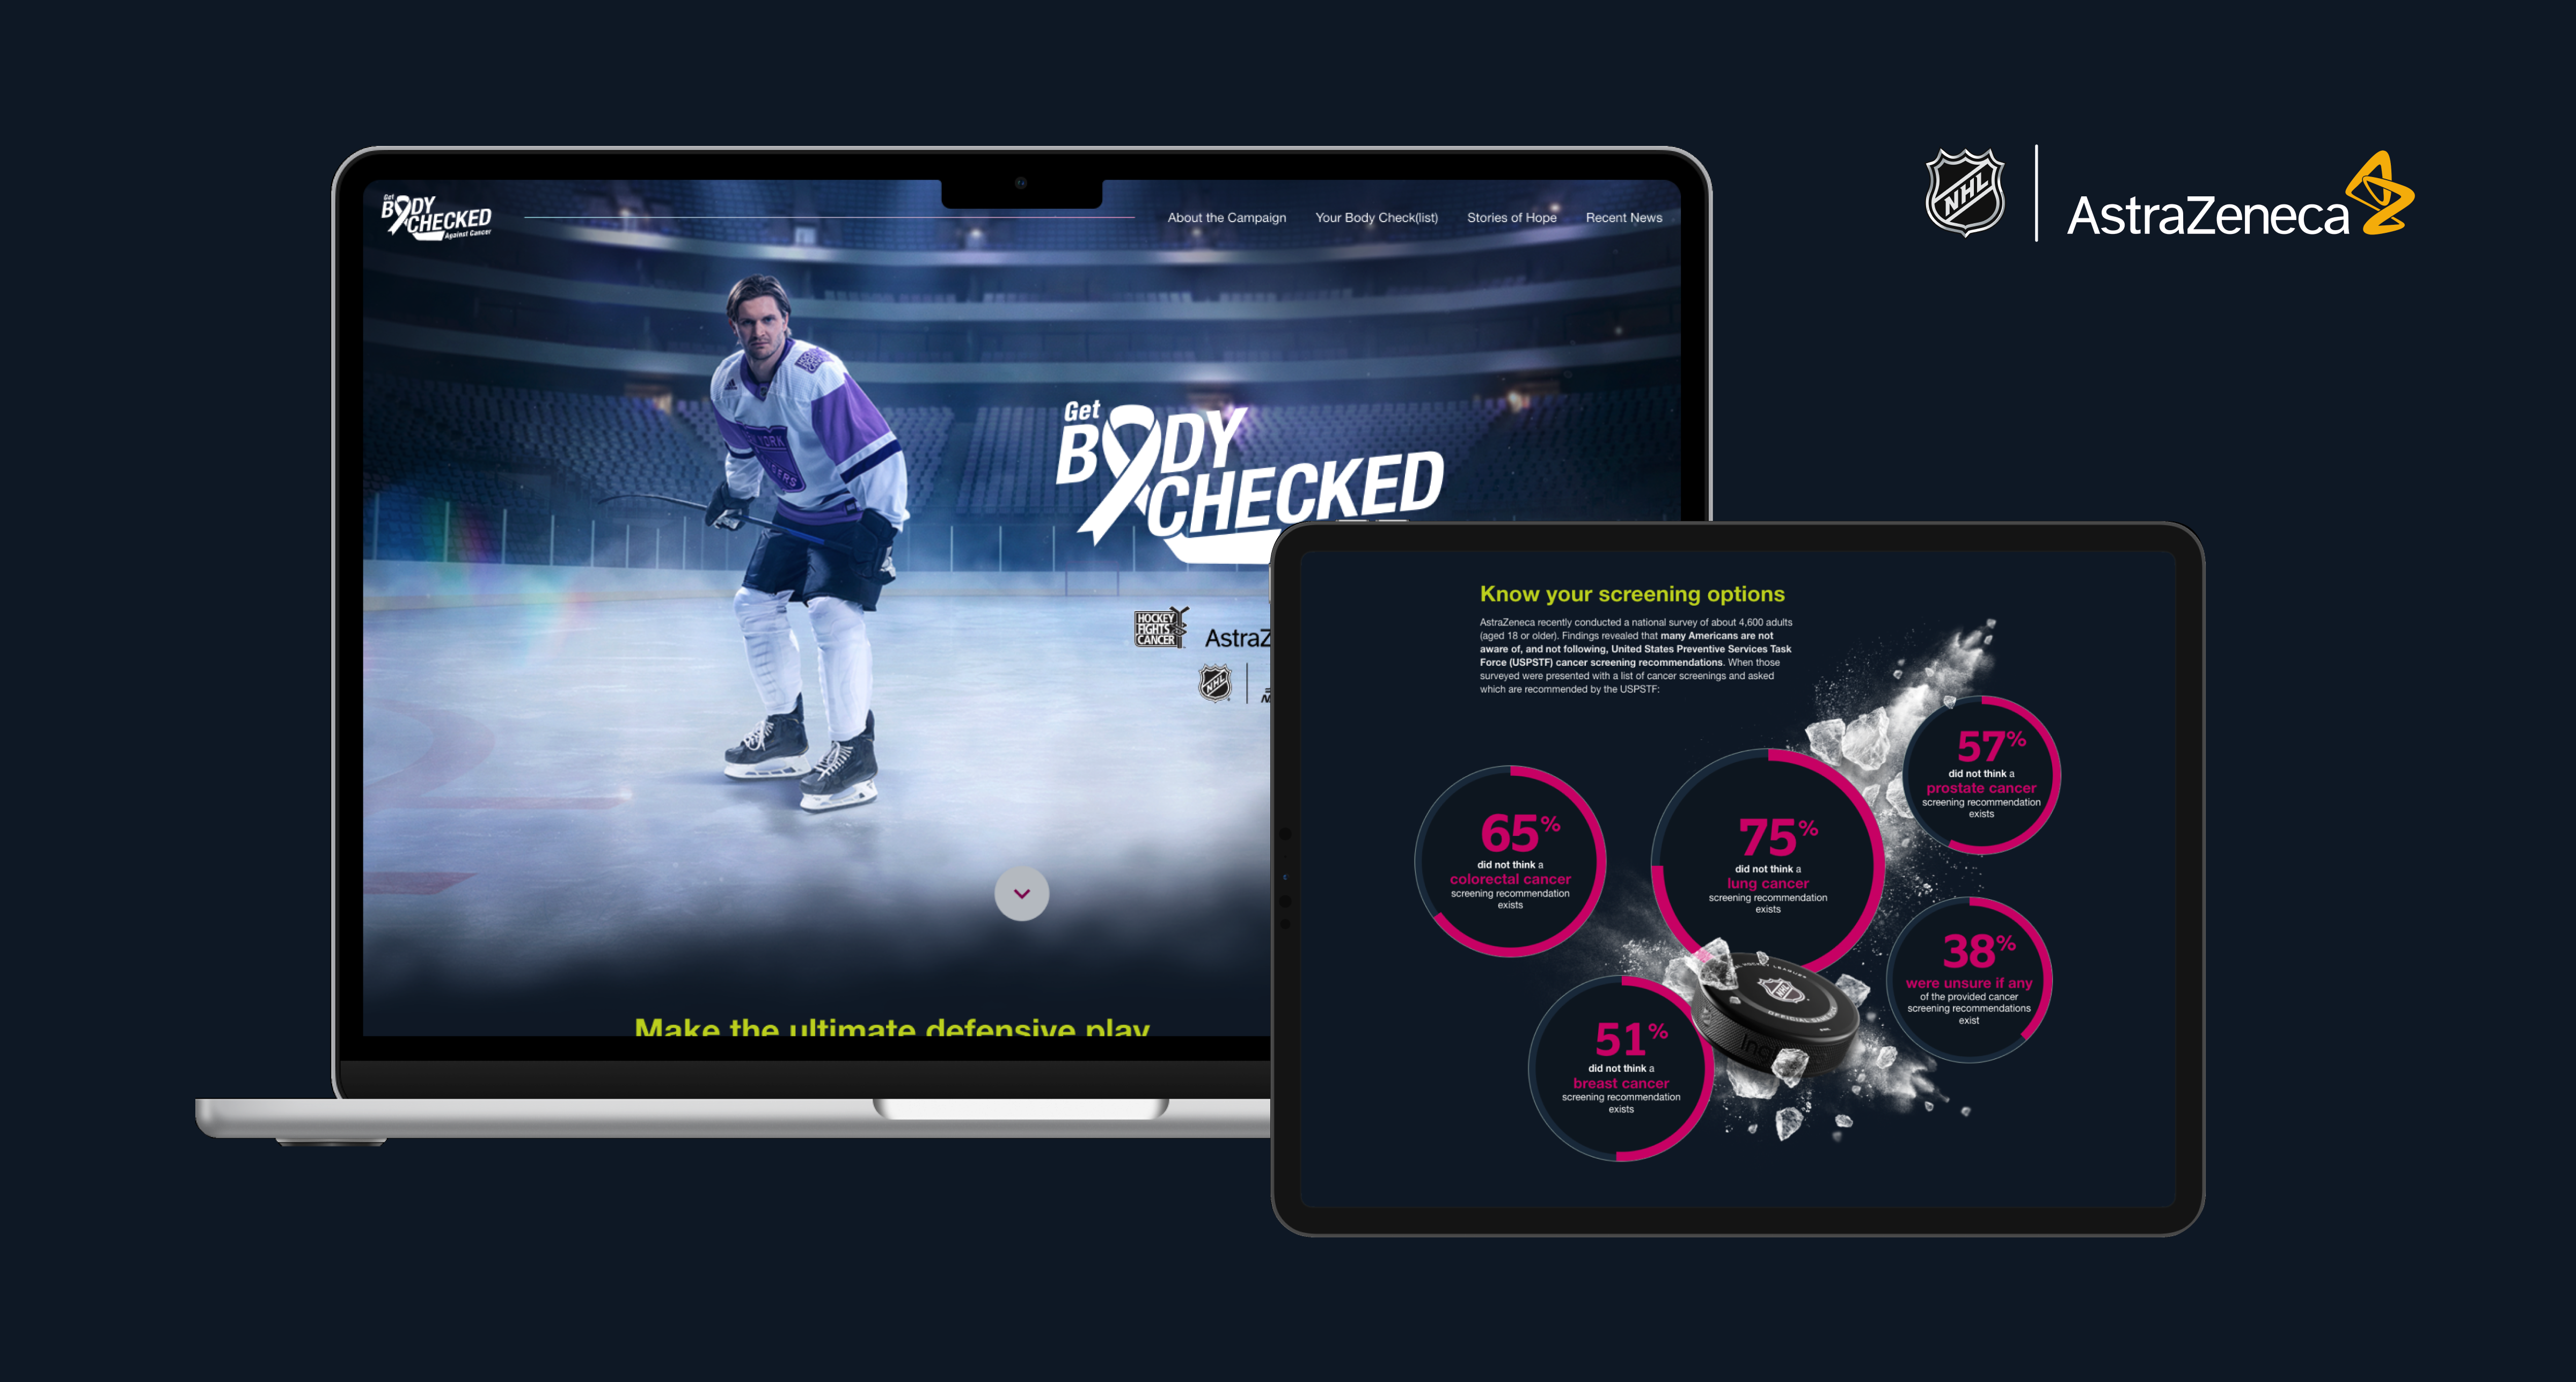 A Health Campaign with AstraZeneca and the NHL